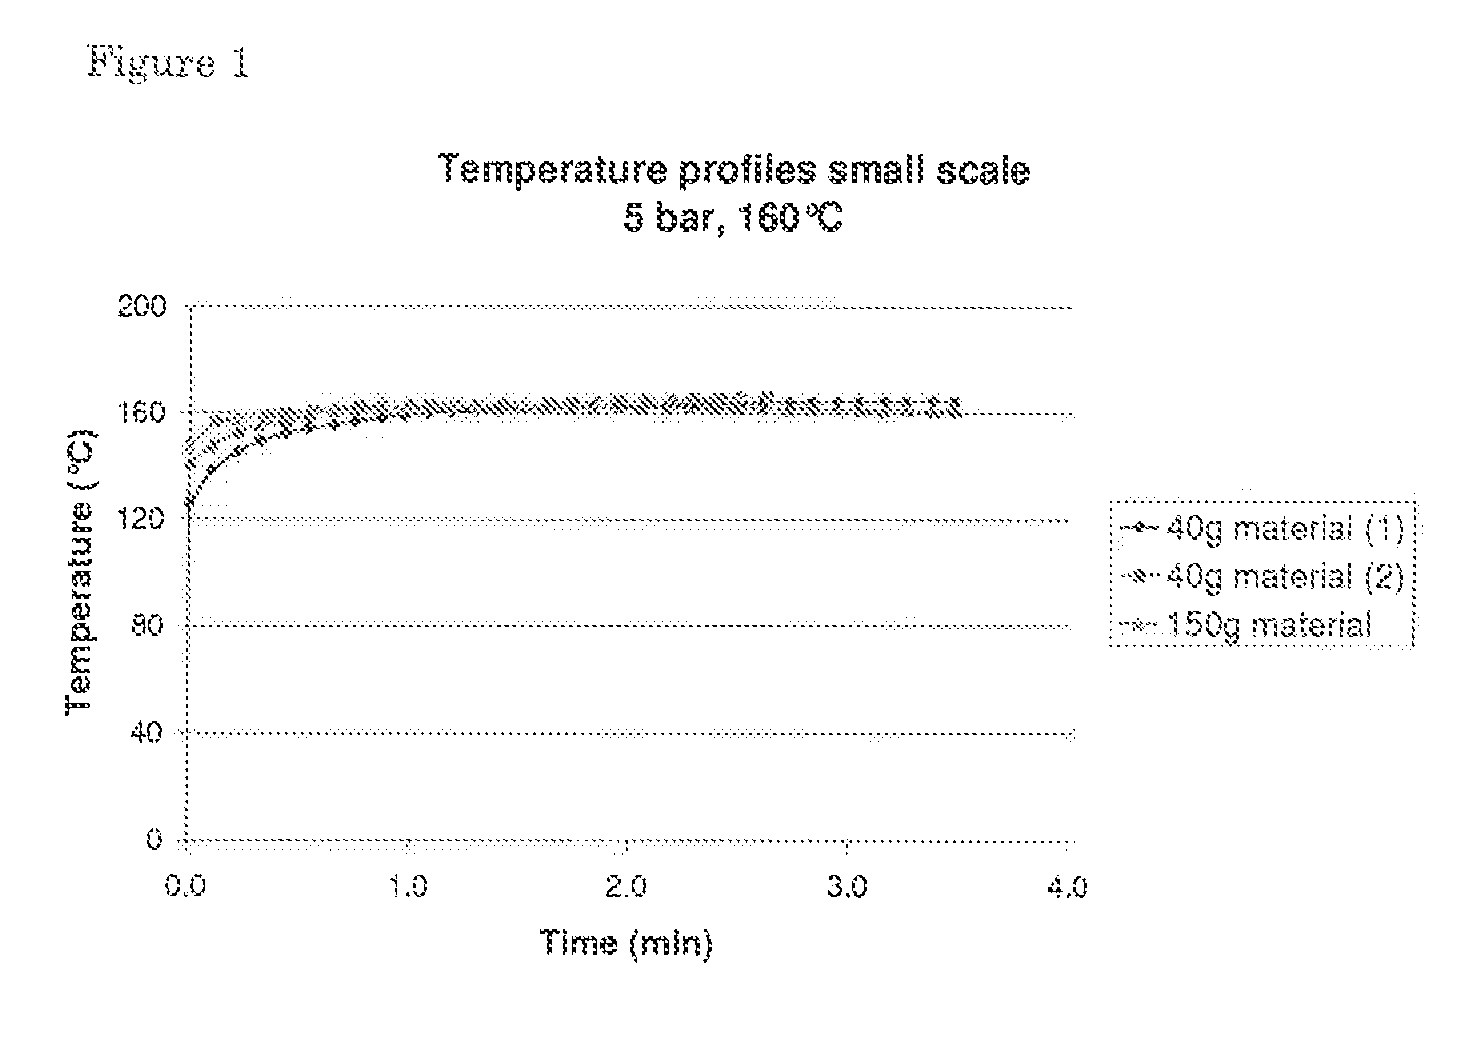 Novel method for processing lignocellulose containing material